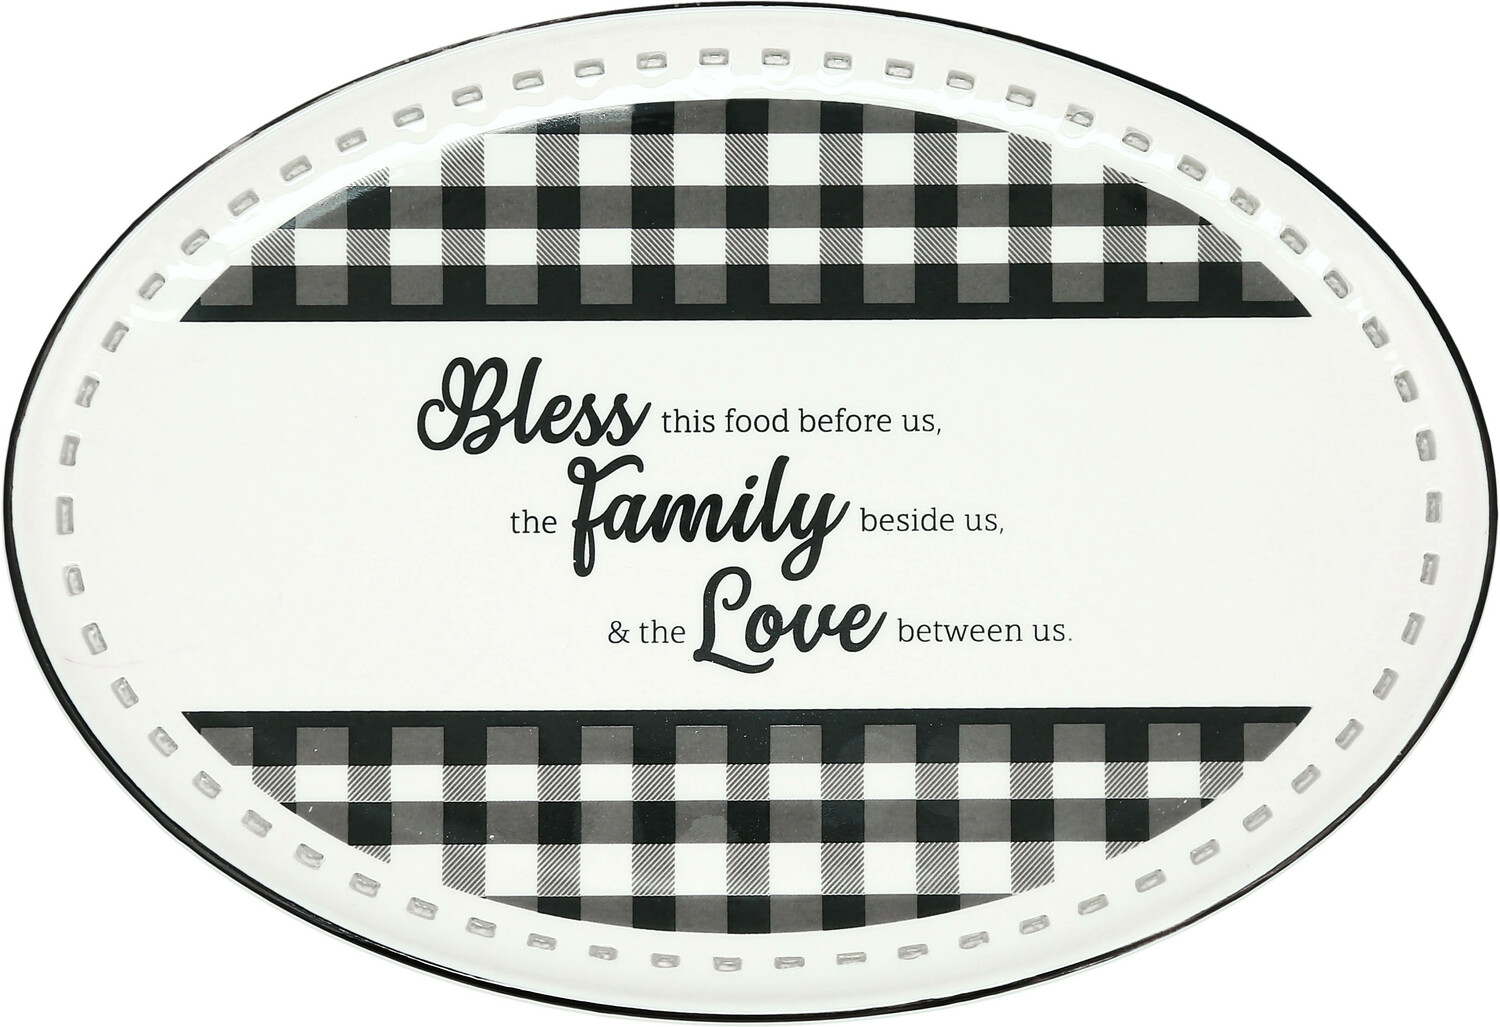 Bless by Farmhouse Family - Bless - 10" x 7"Oval Platter